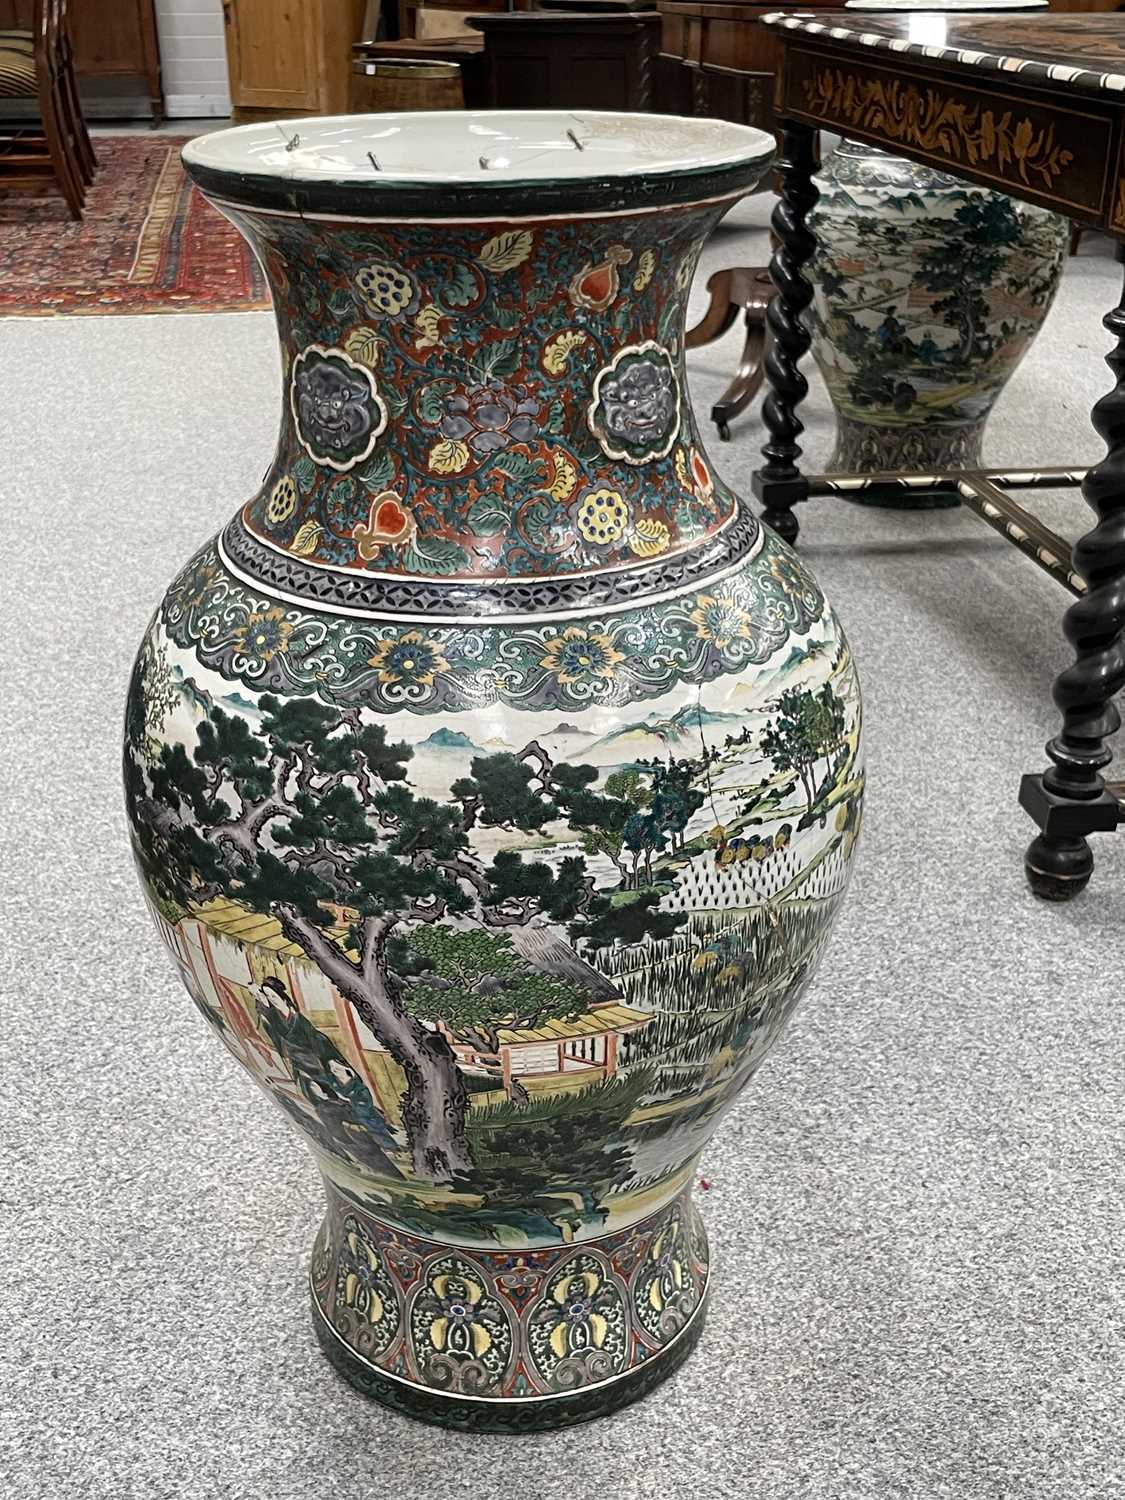 A PAIR OF LARGE CHINESE PORCELAIN VASES, 19TH CENTURY - Image 22 of 23